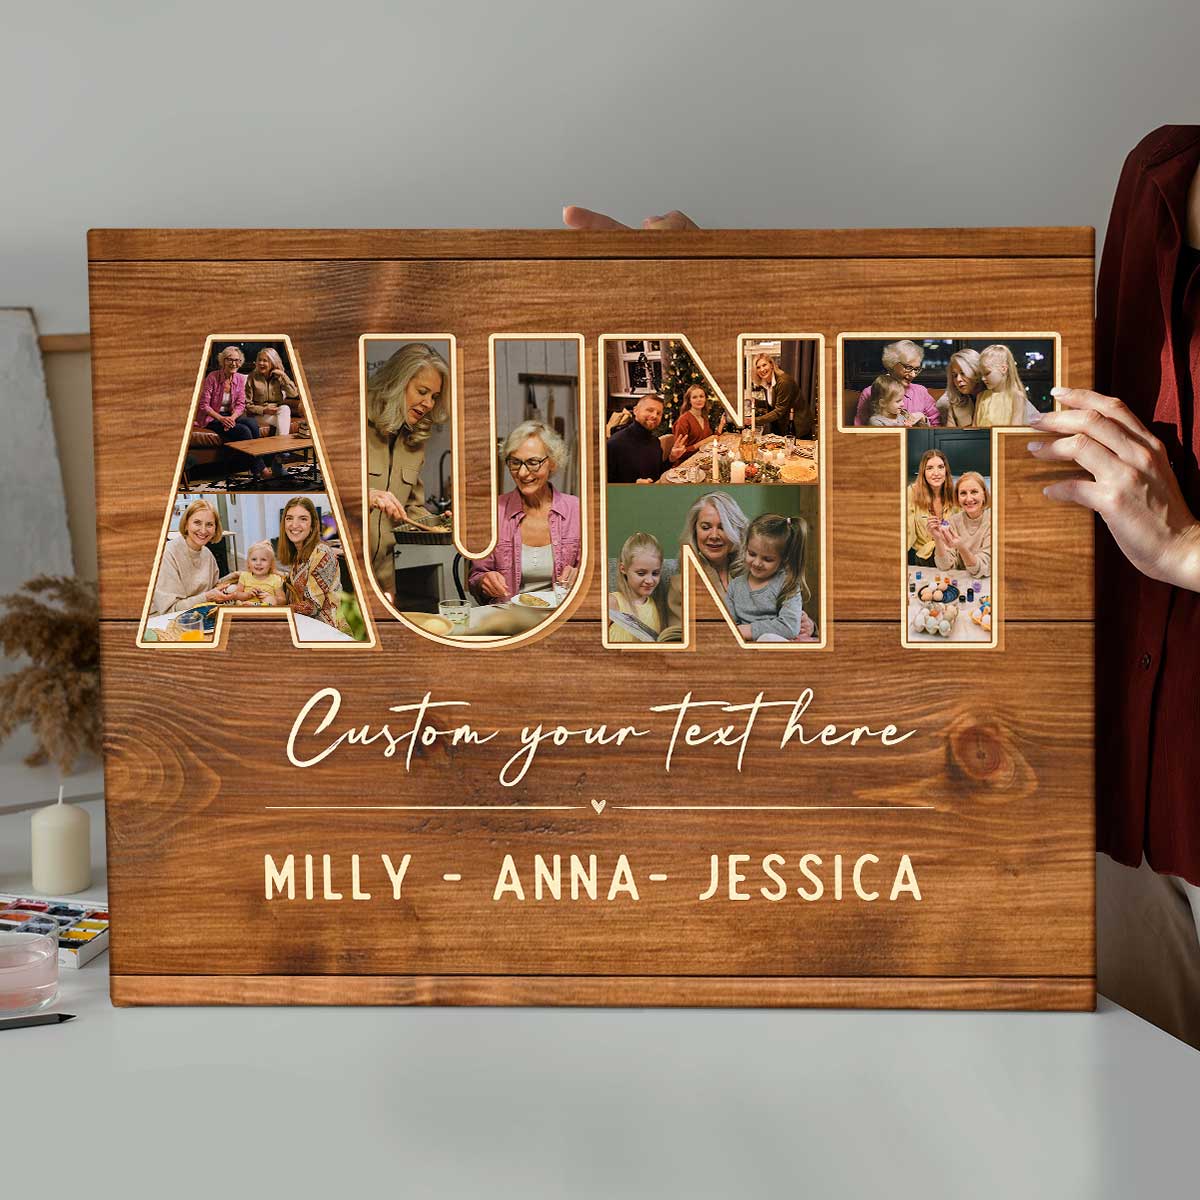 https://benicee.com/wp-content/uploads/2022/10/Personalized-Aunt-Gift-Auntie-Photo-Collage-Gift-for-an-Aunt-Christmas-Gifts-for-Auntie-from-Nephew-Niece-2.jpg